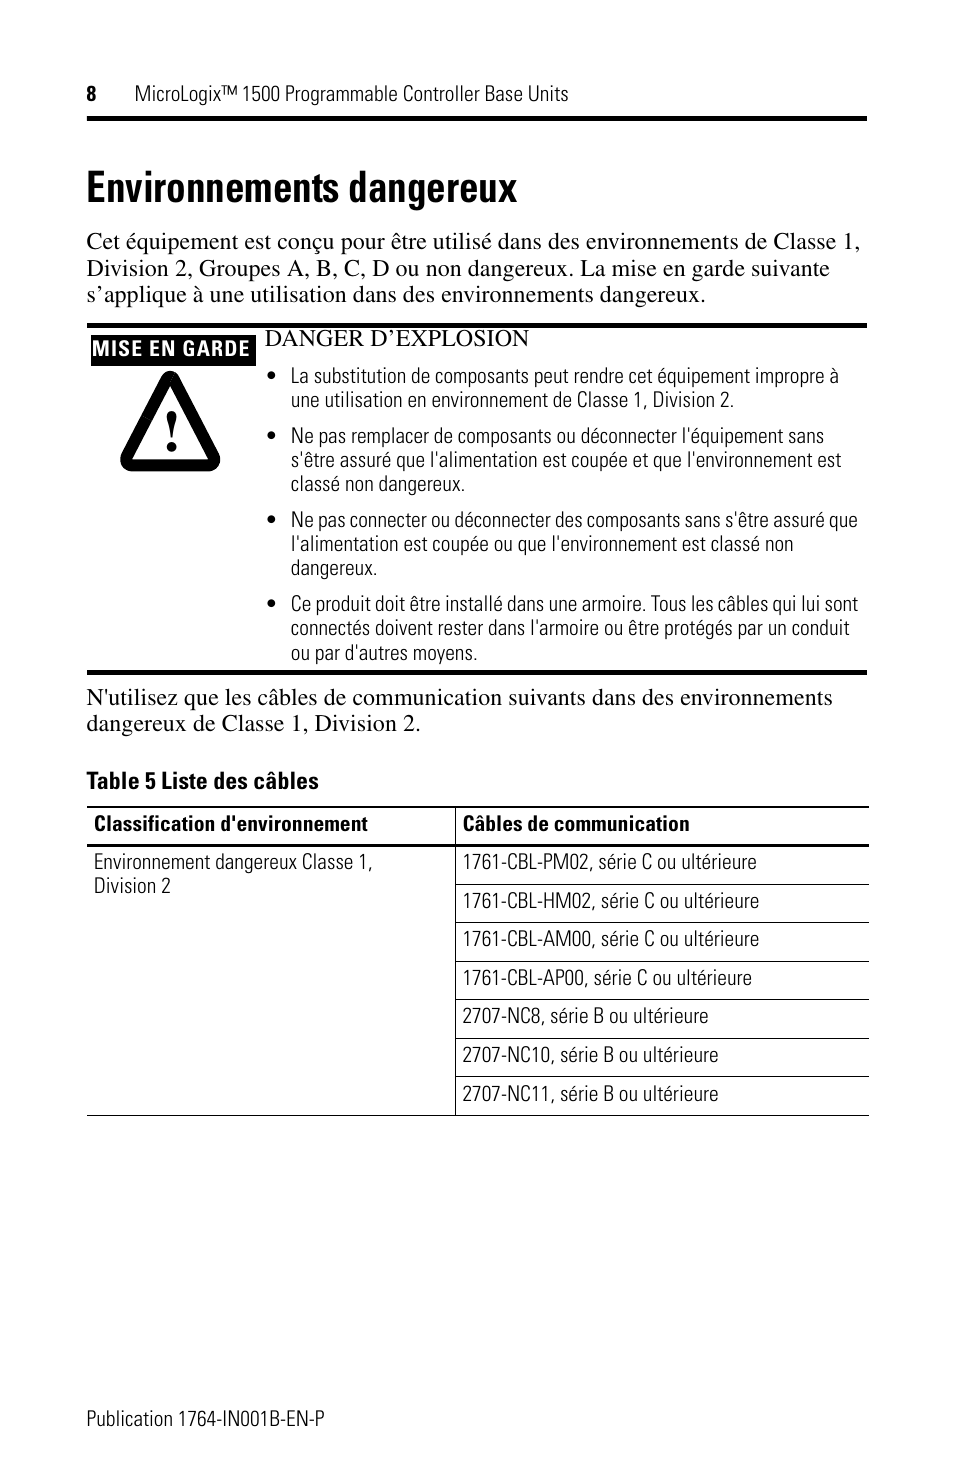 Environnements dangereux | Rockwell Automation 1764-28BXB MicroLogix 1500 Programmable Controller Base Units User Manual | Page 8 / 27